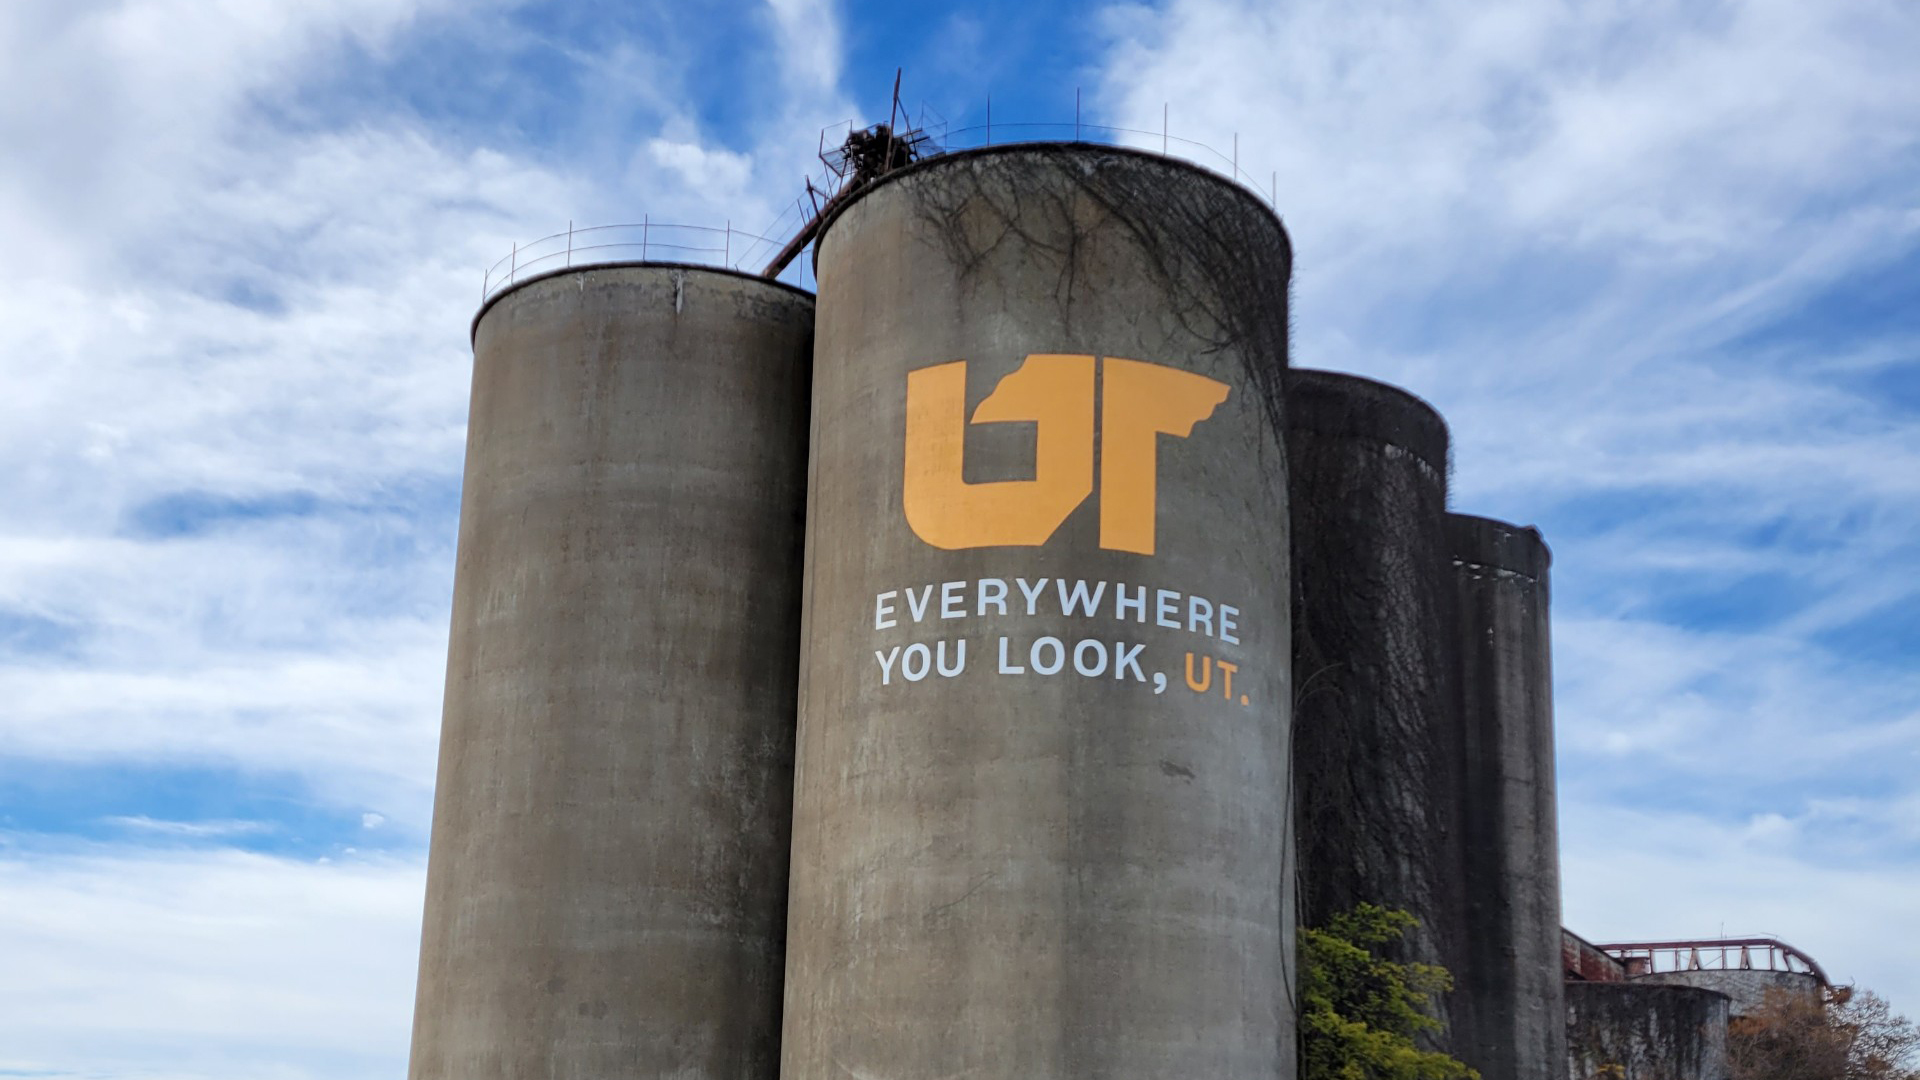 UT Martin Alumnus Recommends Tiptonville Silo for 49th Mural in the “Everywhere You Look, UT” Campaign